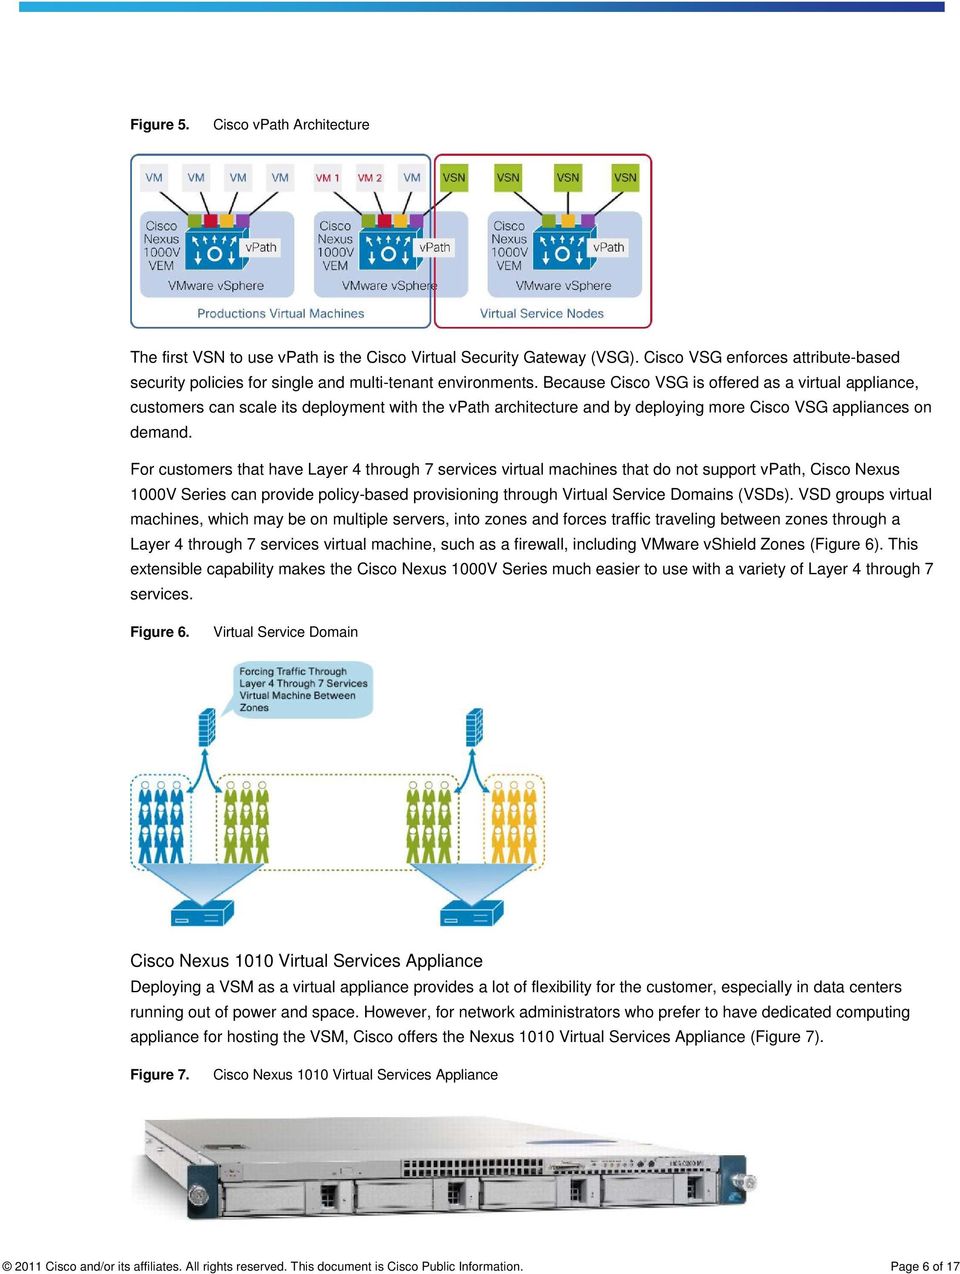 Because Cisco VSG is offered as a virtual appliance, customers can scale its deployment with the vpath architecture and by deploying more Cisco VSG appliances on demand.